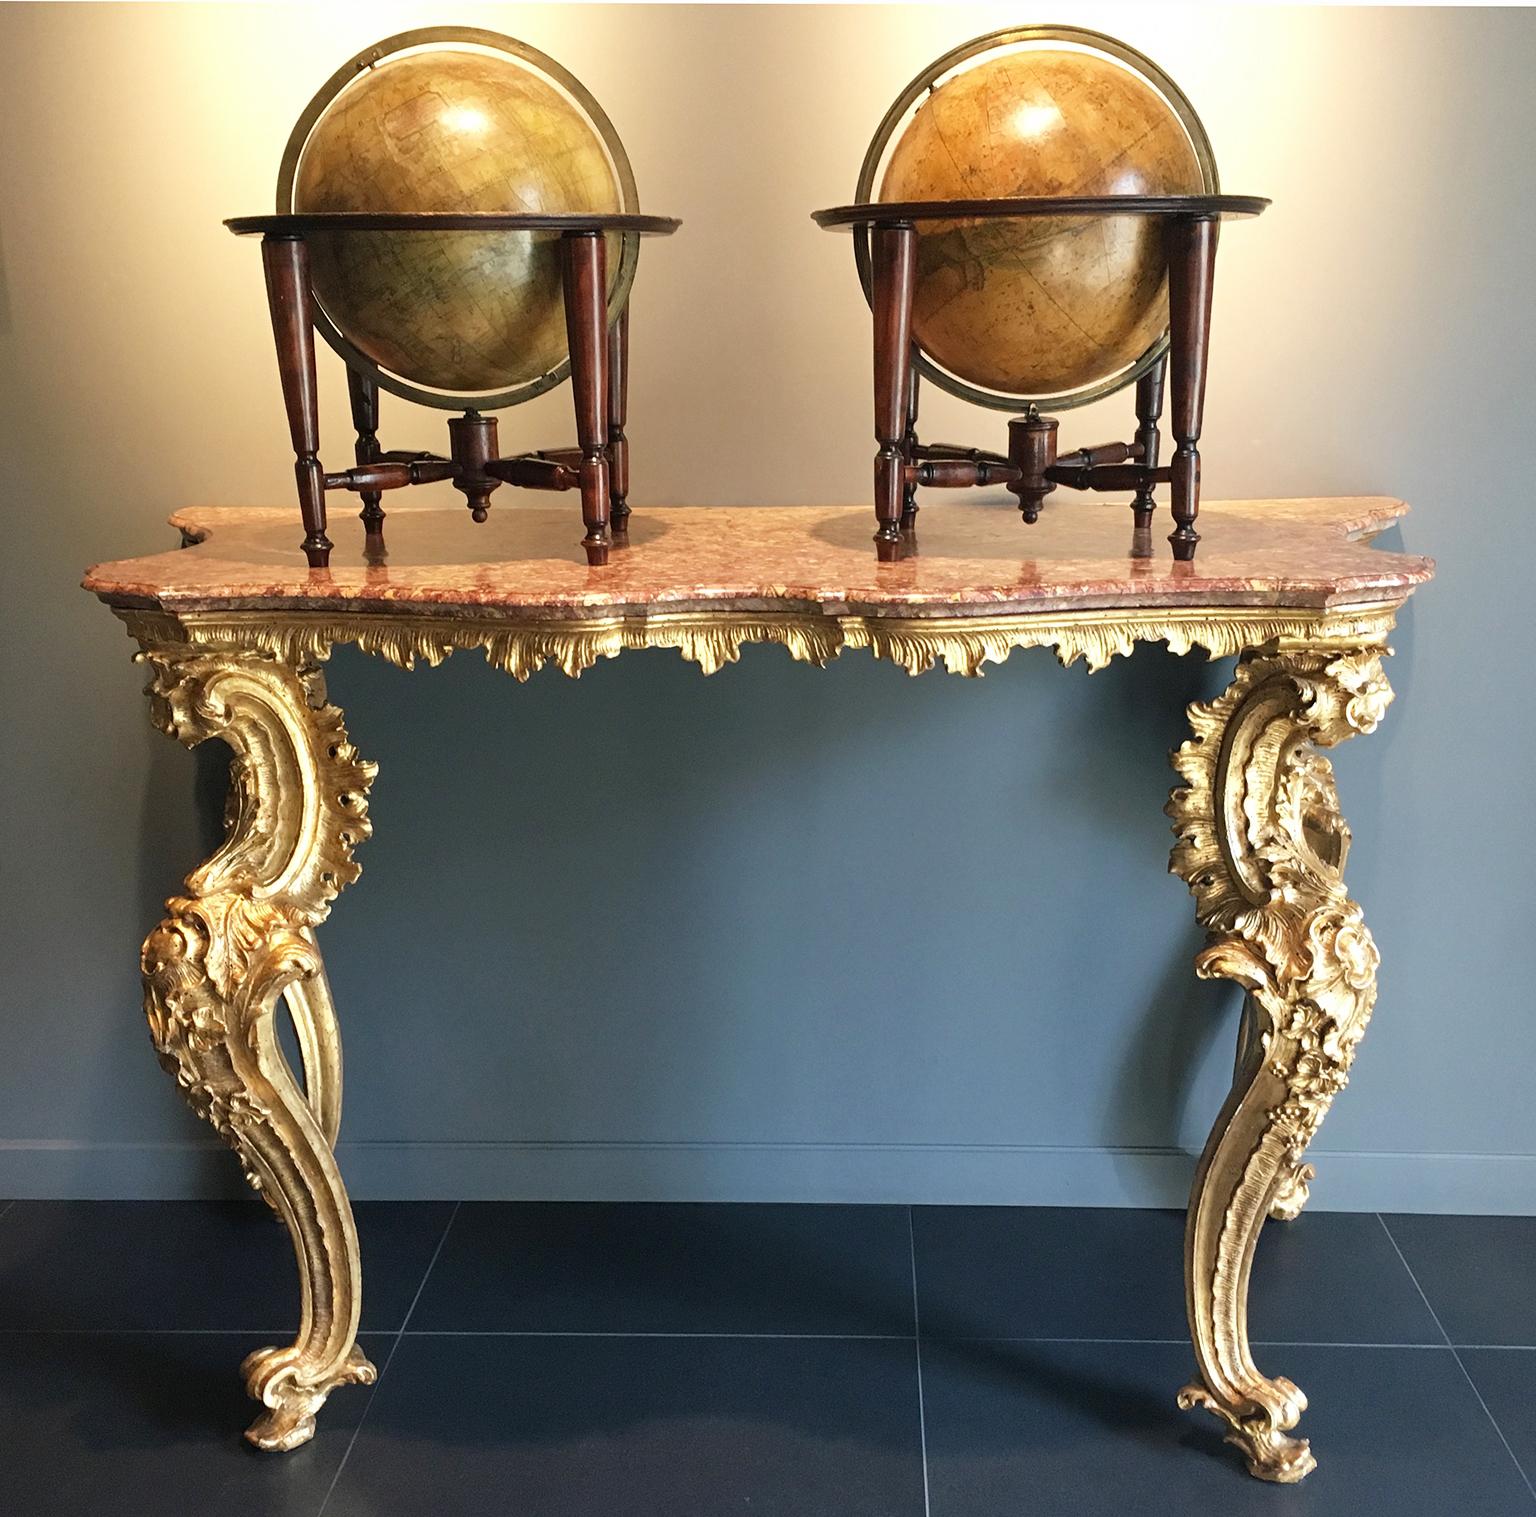 Pair of English 12-inch Globes by William Harris, London, 1832 and 1835 For Sale 12